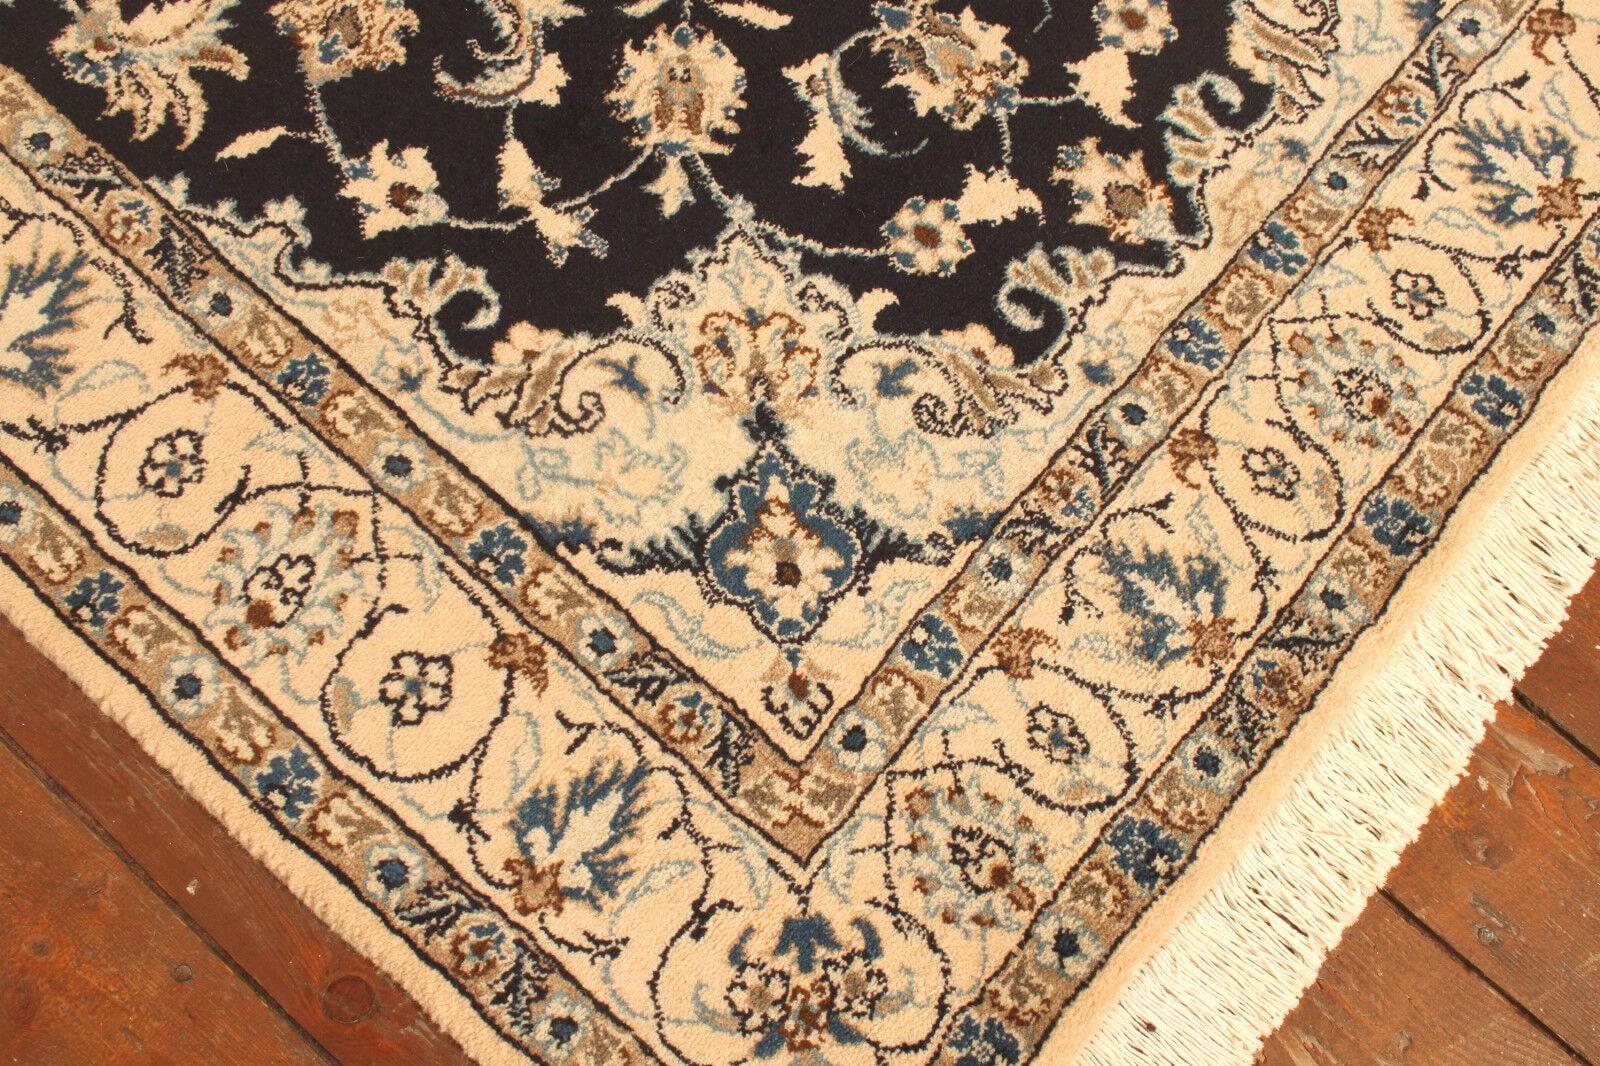 Handmade Vintage Persian Style Nain Rug (3.9’ x 6.6’ / 120cm x 202cm)

Step into the elegance of Persian craftsmanship with our Handmade Vintage Persian Style Nain Rug. Originating from the 1980s, this woolen rug measures 3.9’ x 6.6’ (120cm x